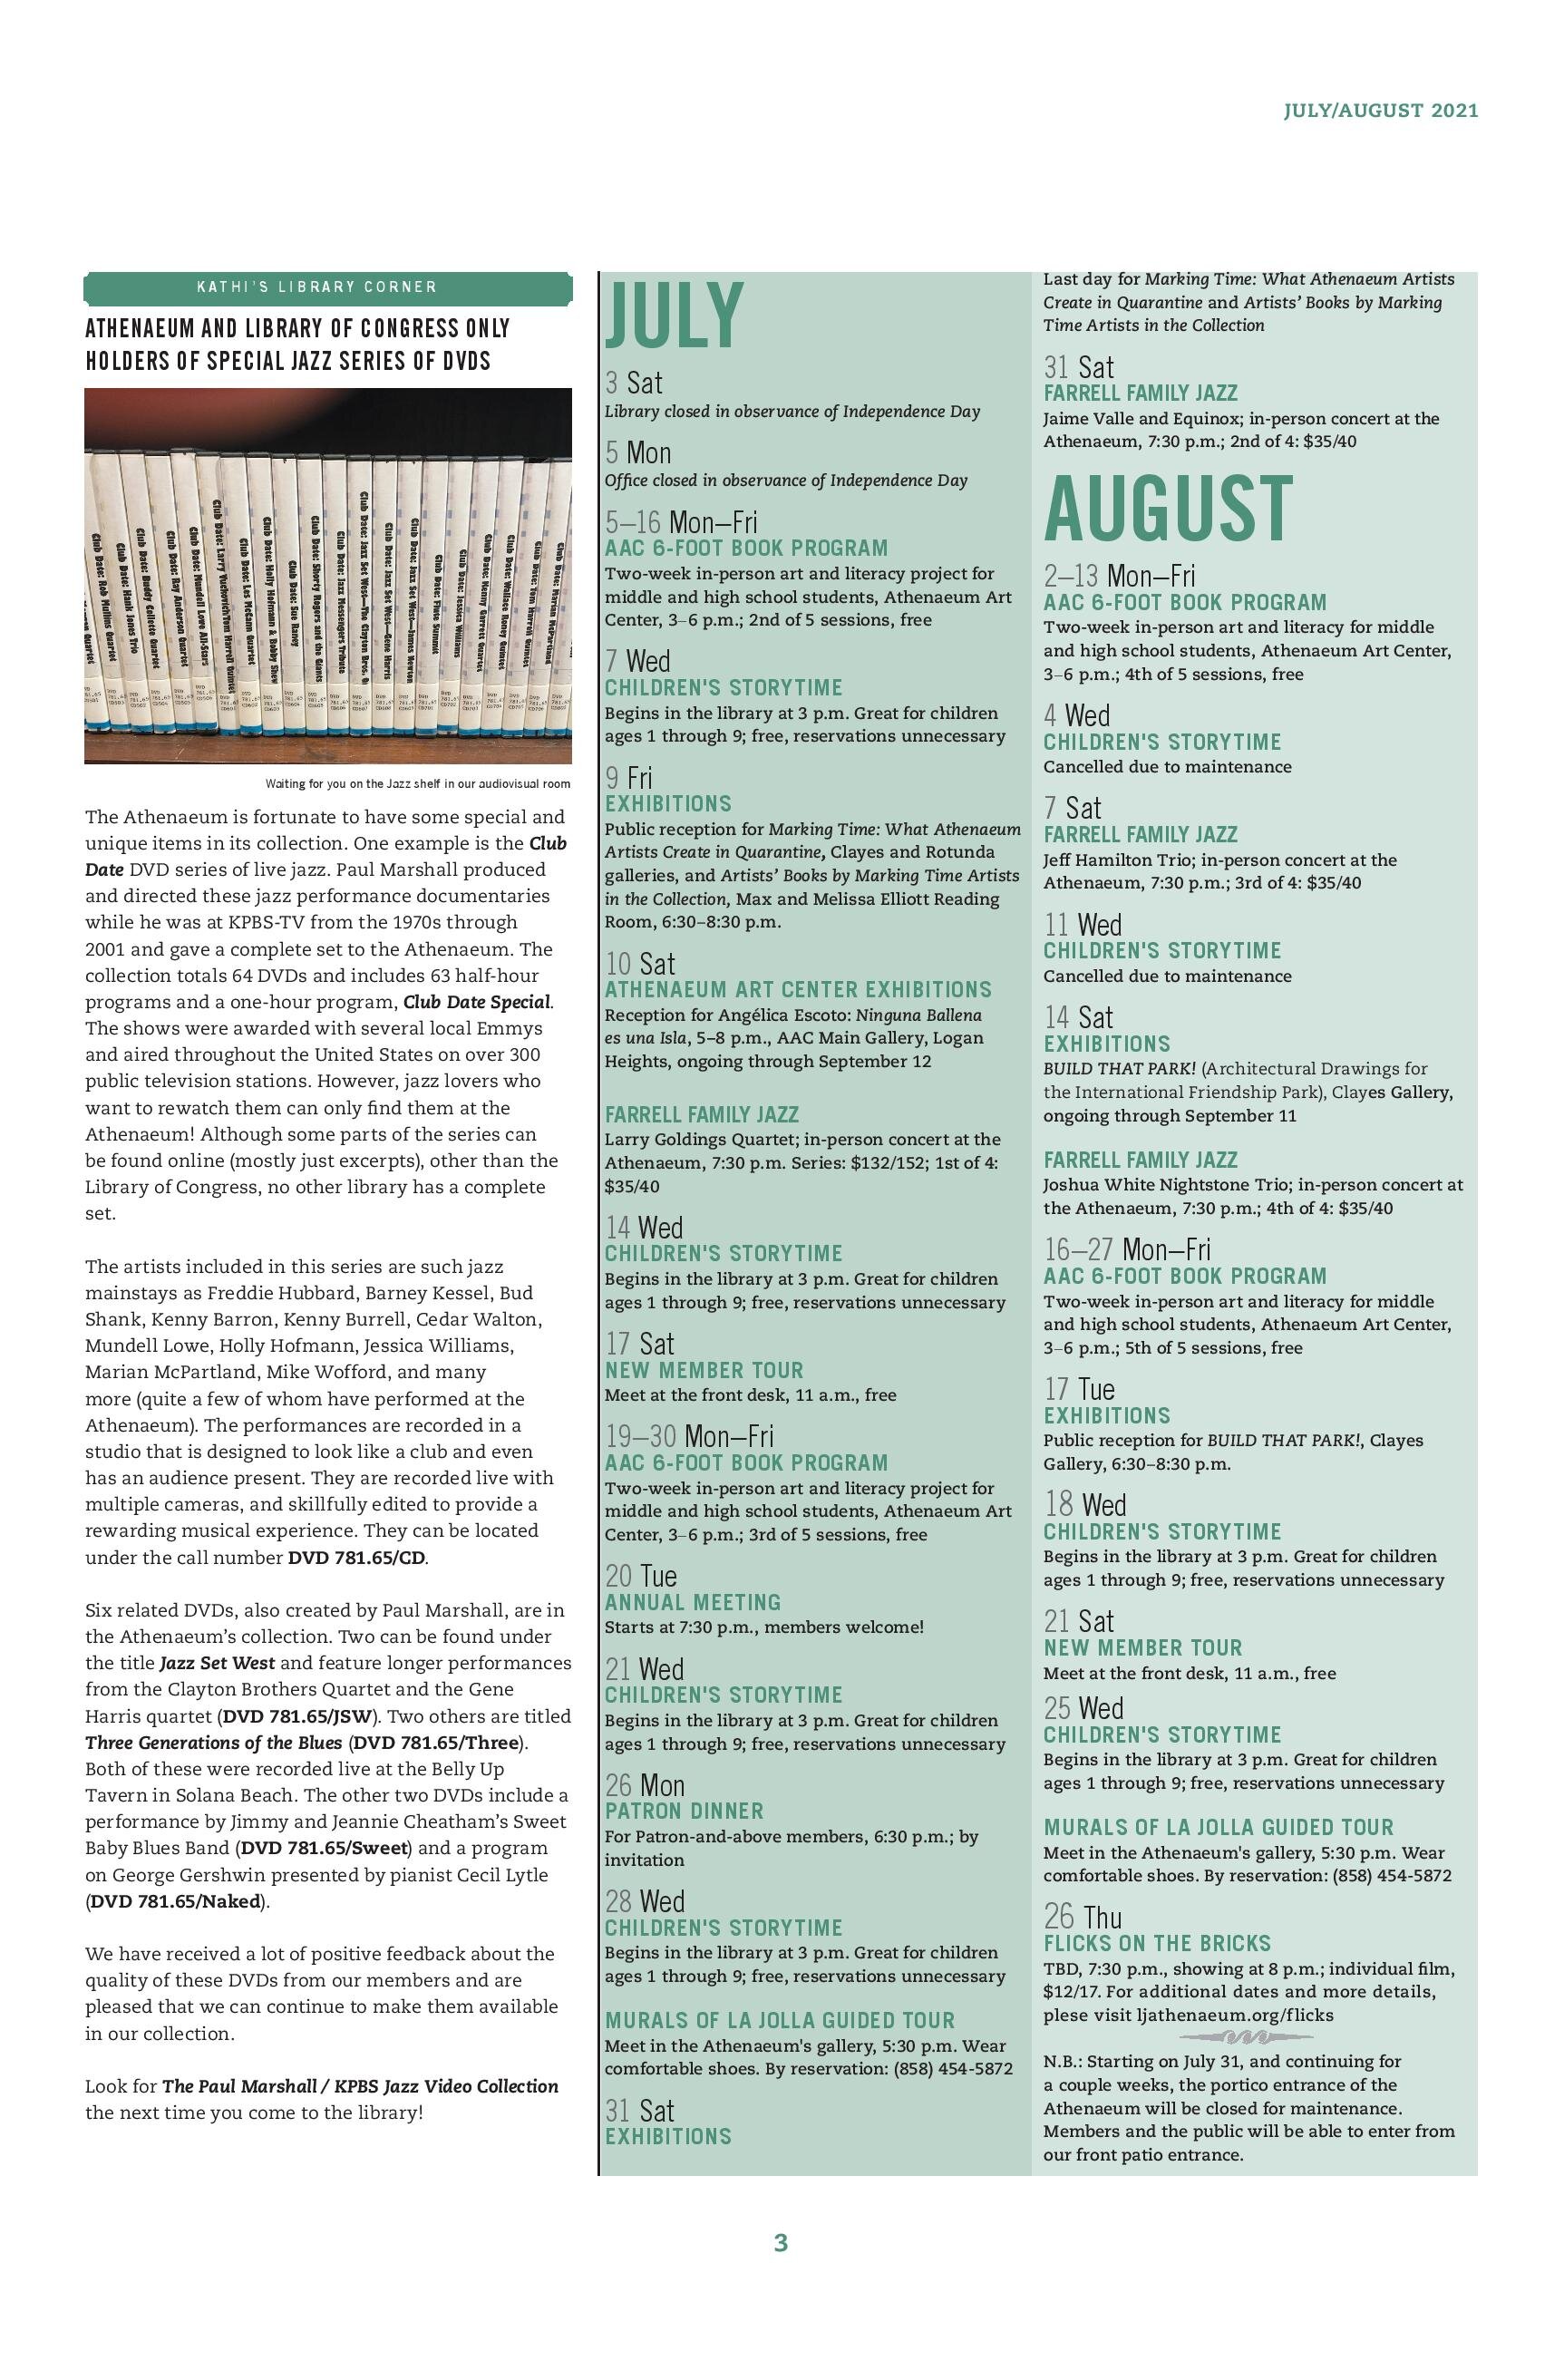 July-August 2021 Newsletter_RGB for website-page-003.jpg